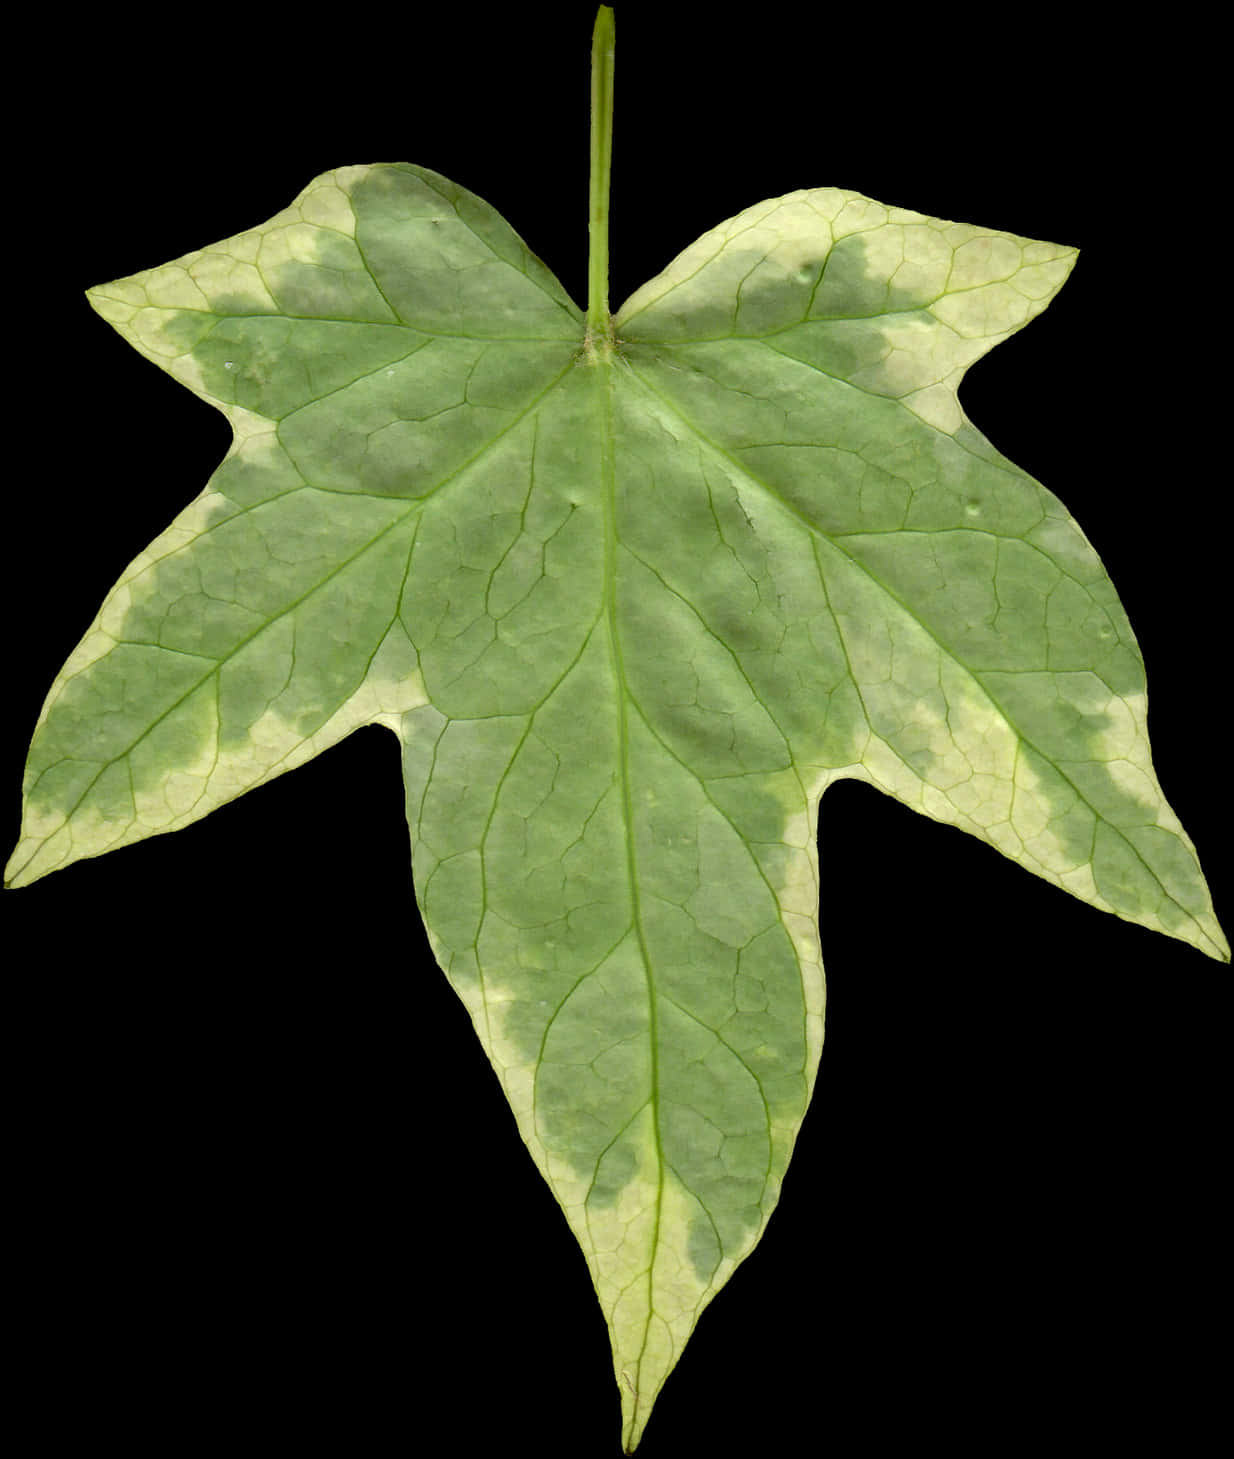 A Green Leaf With White Spots